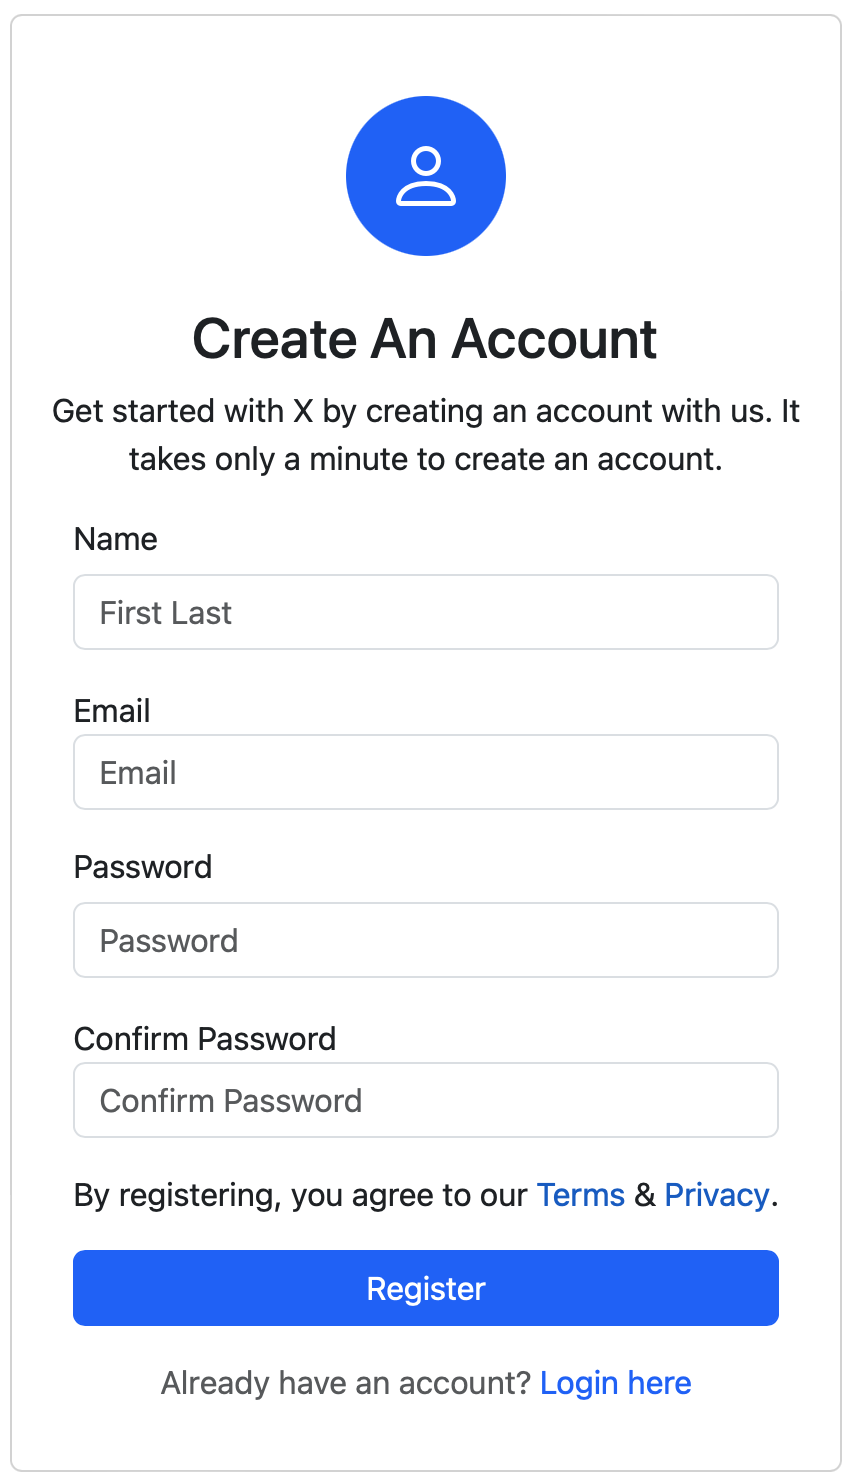 Bootstrap Signup form with Labels